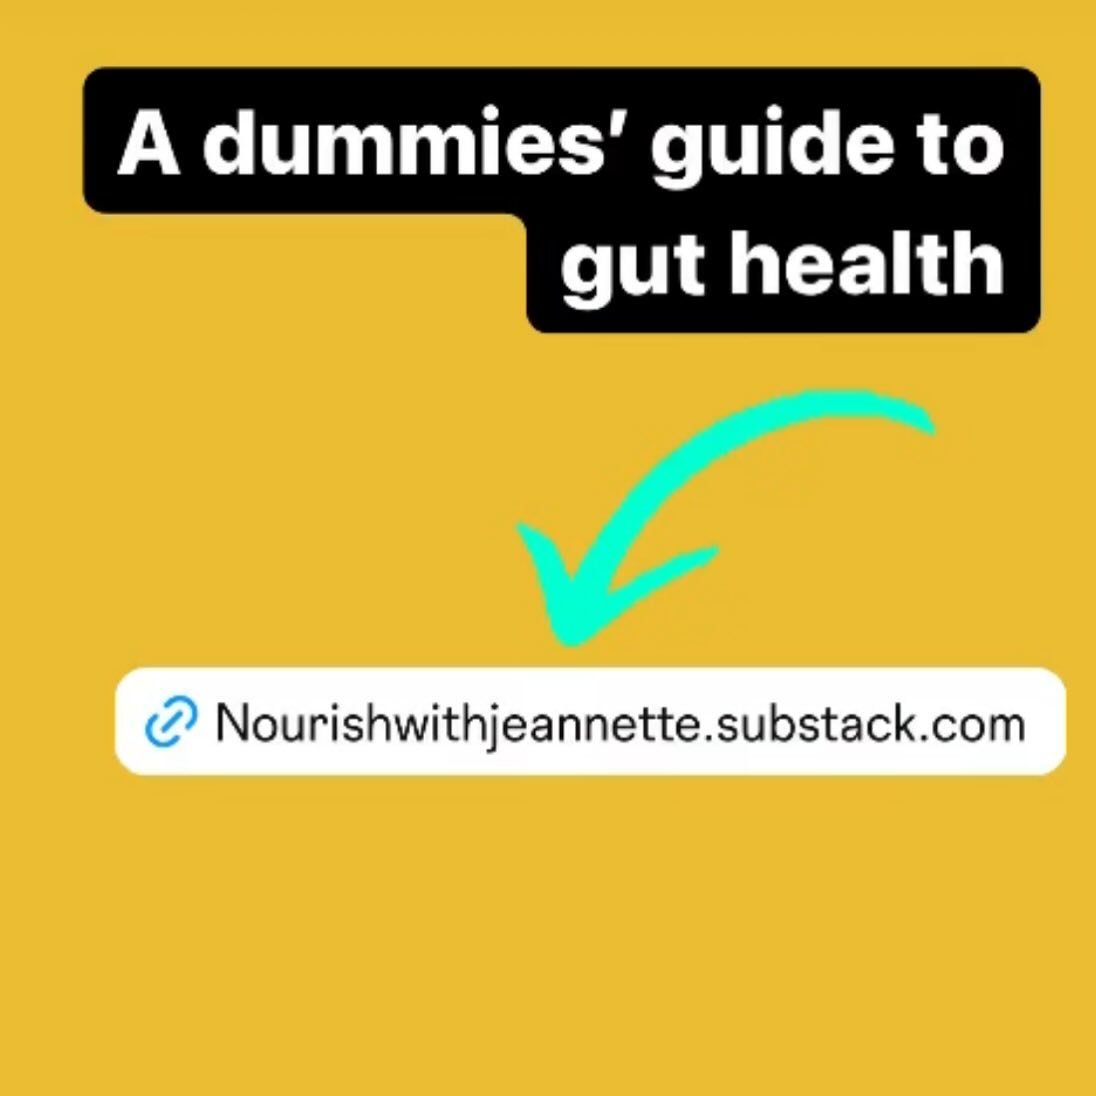 When Netflix and London bus ads start talking about gut health you know it has arrived. 

But are you clear about it and how to eat to get all the benefits?

In this week&rsquo;s article I write a simple explainer. Link in biography in my profile abo